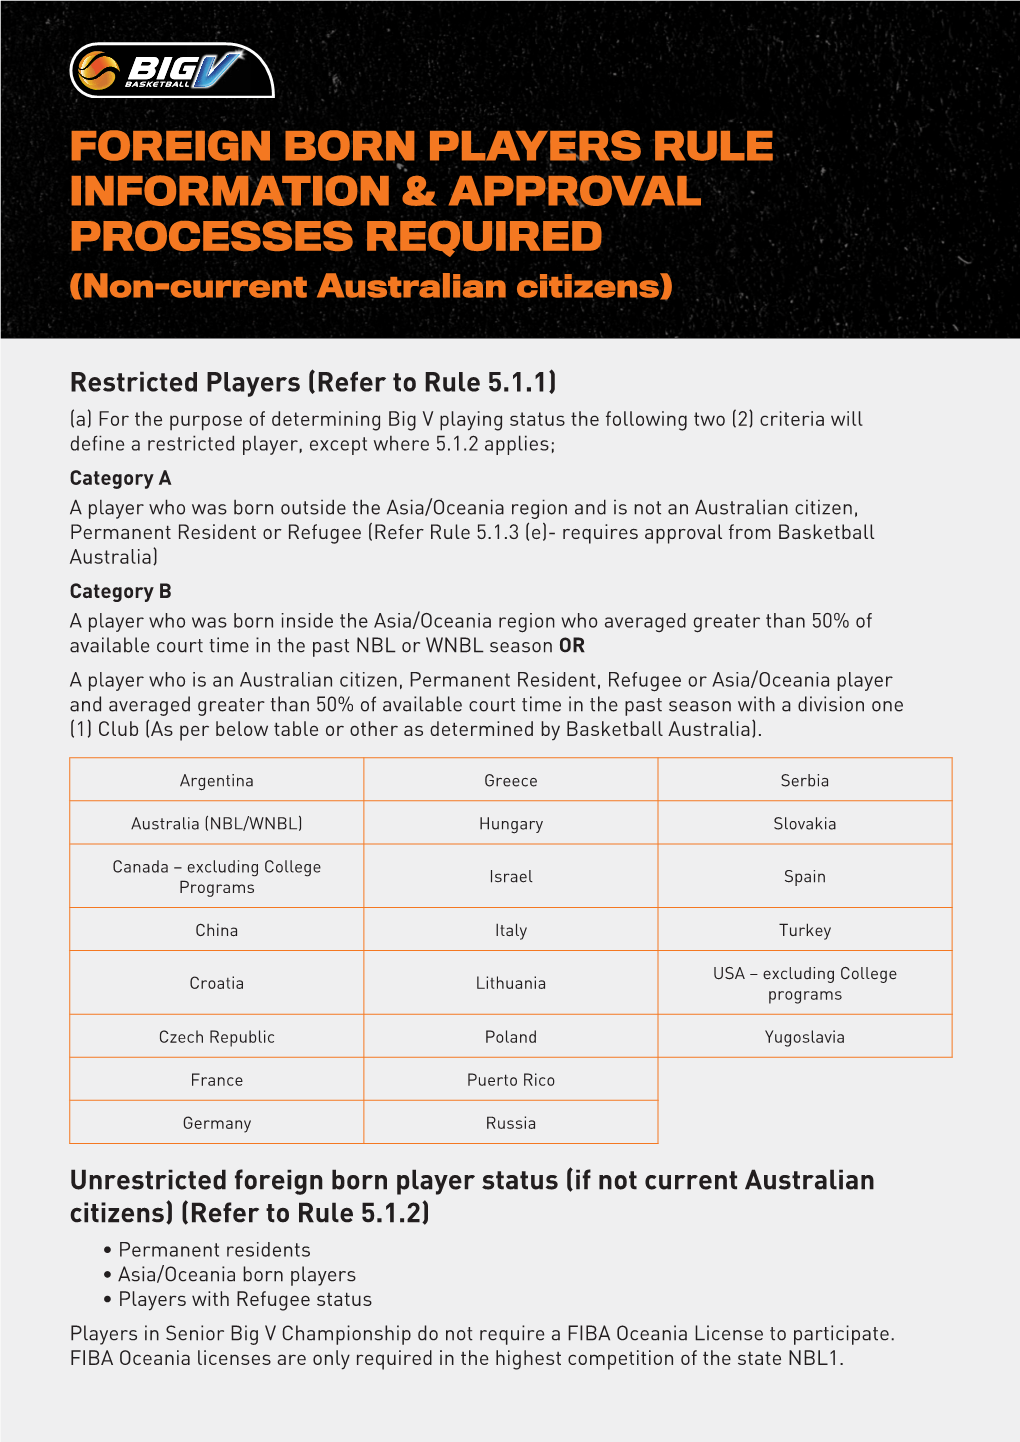 Foreign Born Players Rule Information & Approval Processes Required